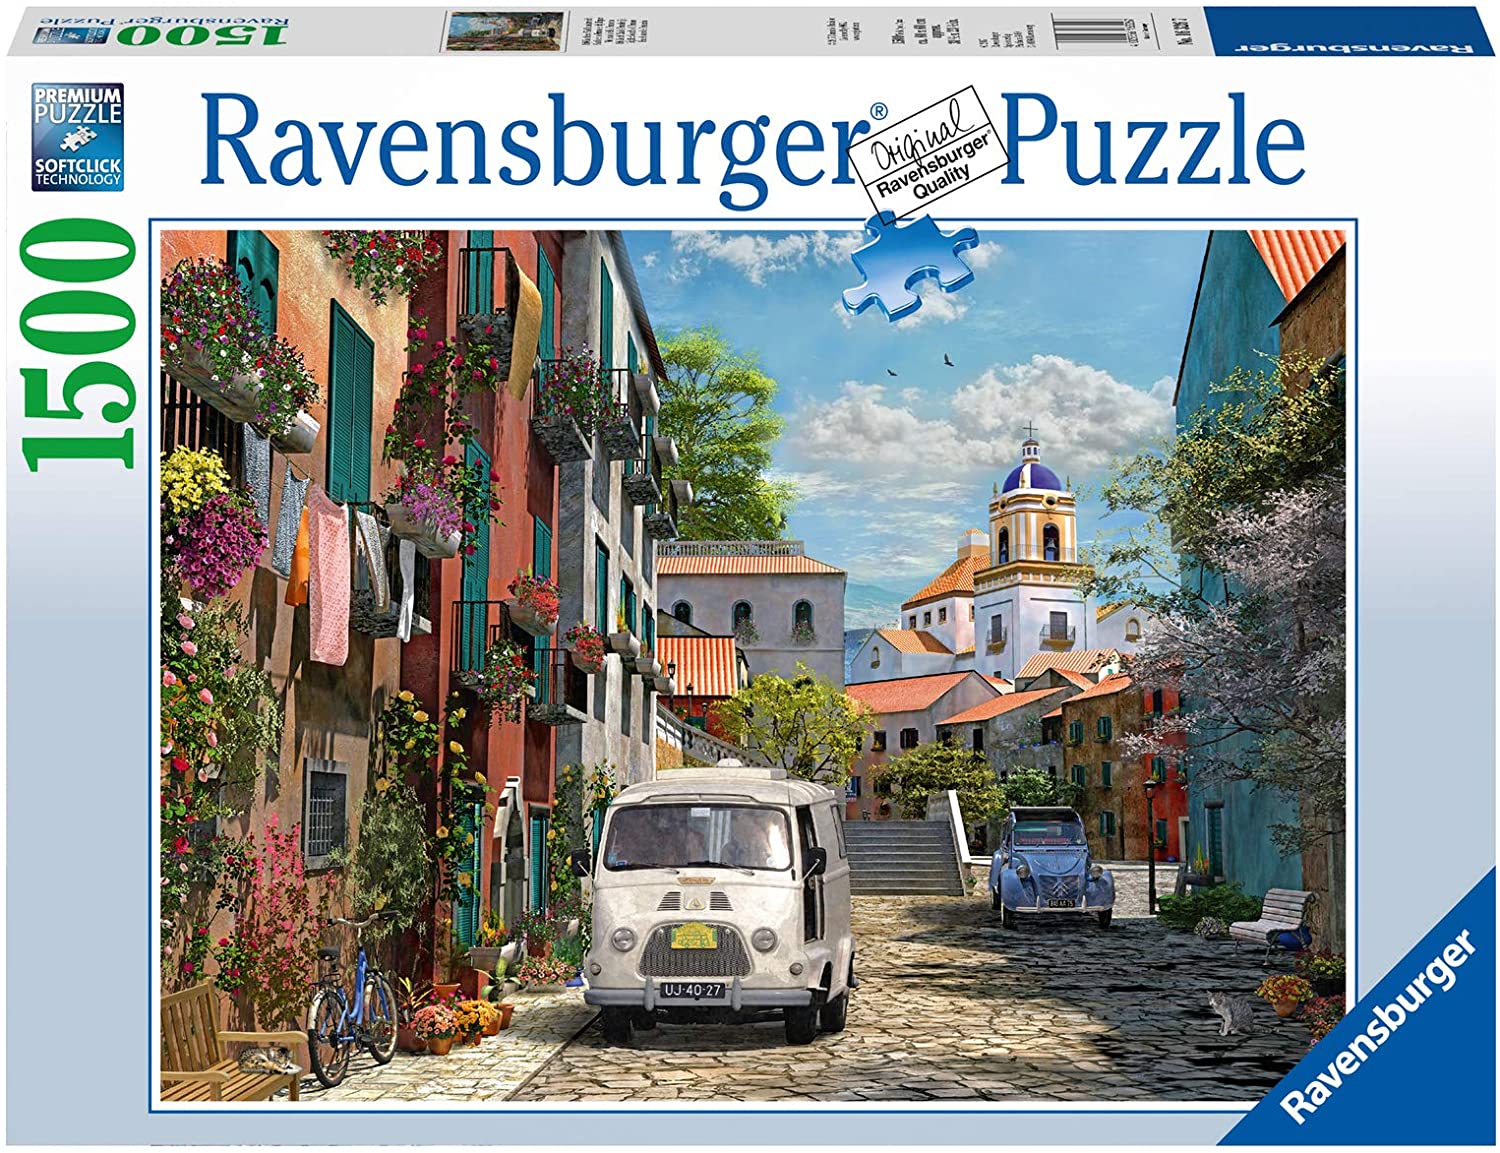 Ravensburger Puzzle - Idyllic South of France - 1500 pieces